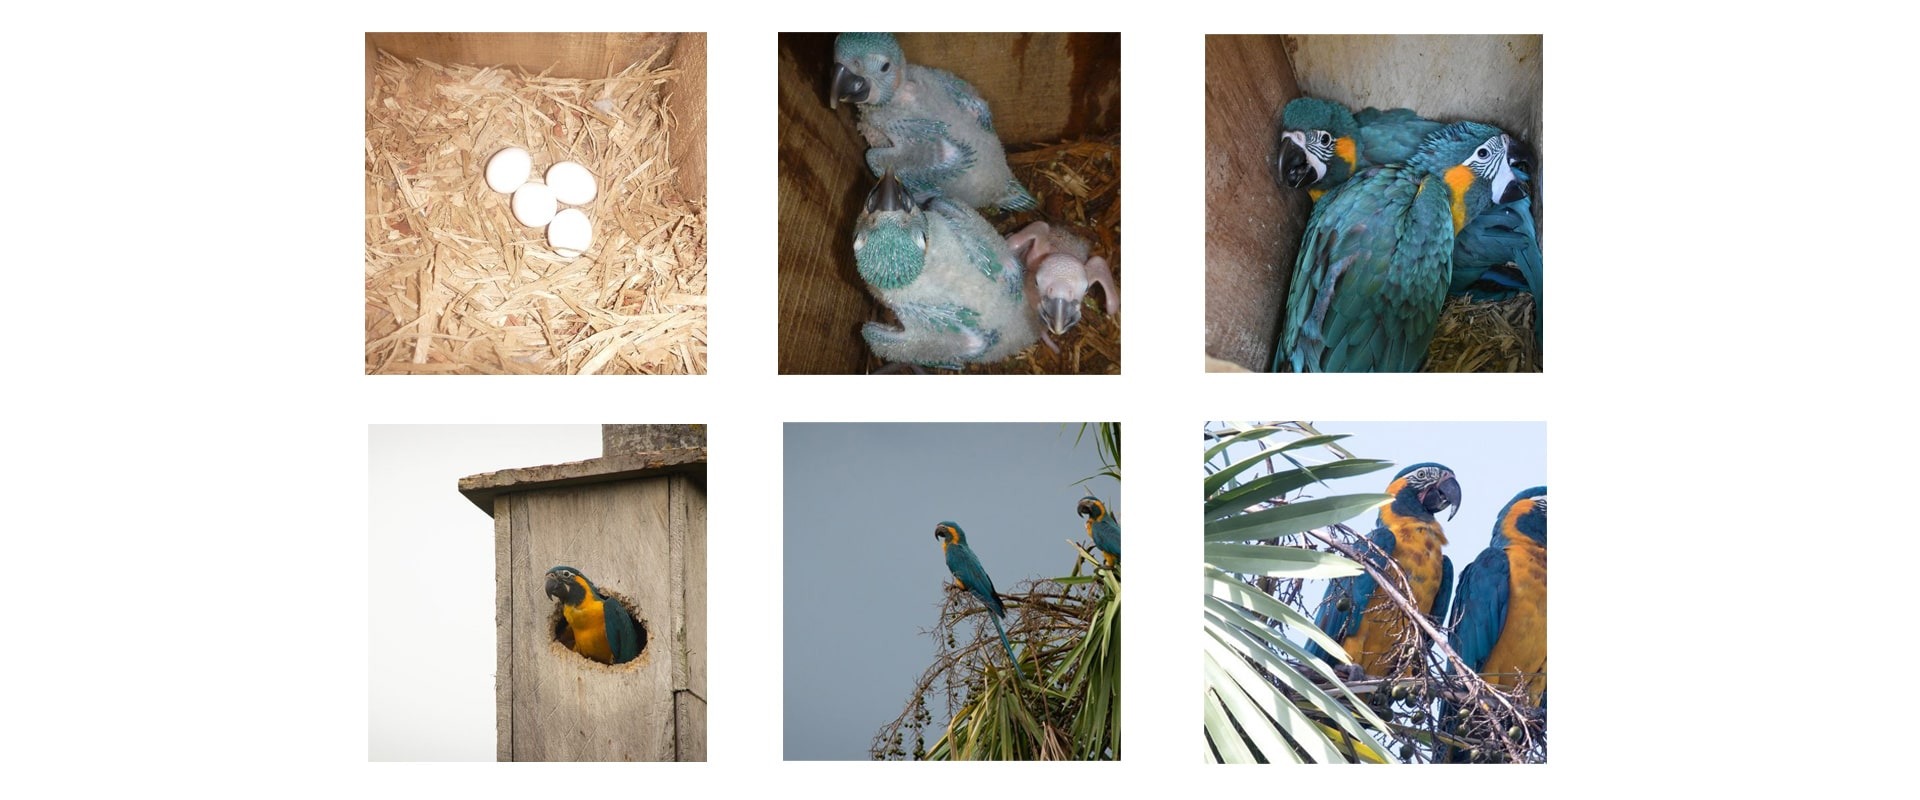 An example of a successful nesting box, resulting in the fledging of critically endangered Blue-throated Macaws.